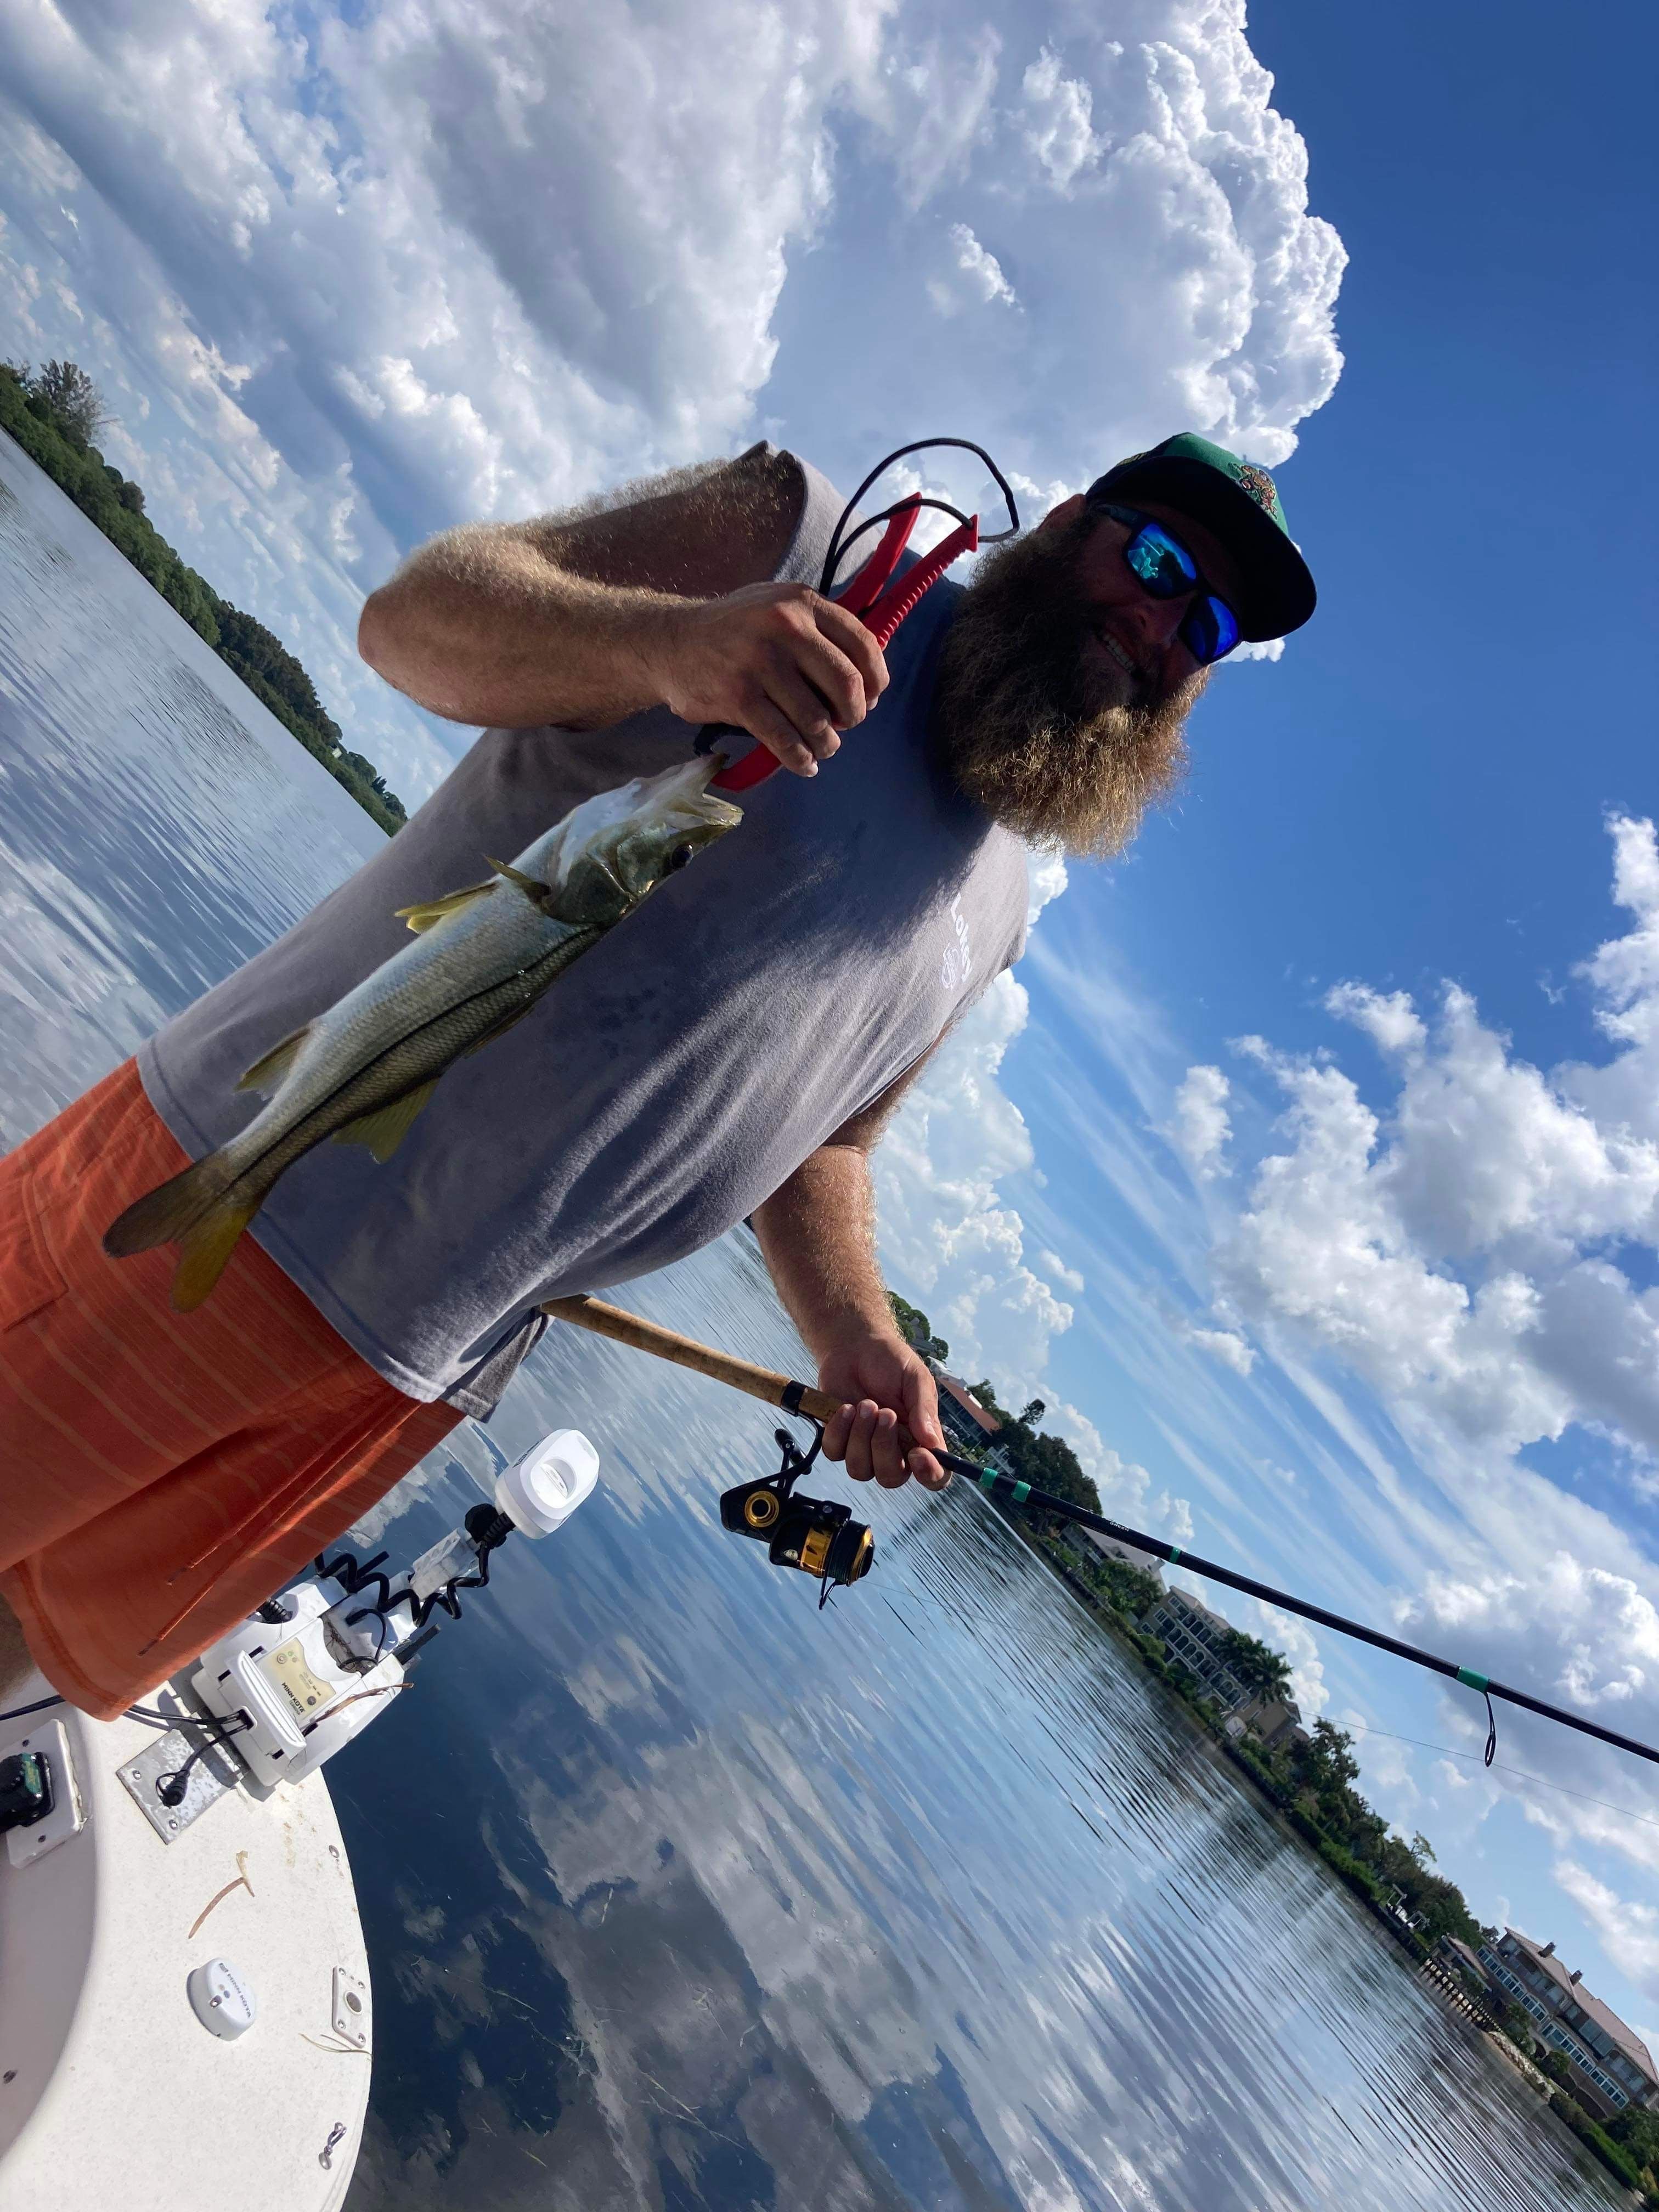 Snook Fishing in Tampa